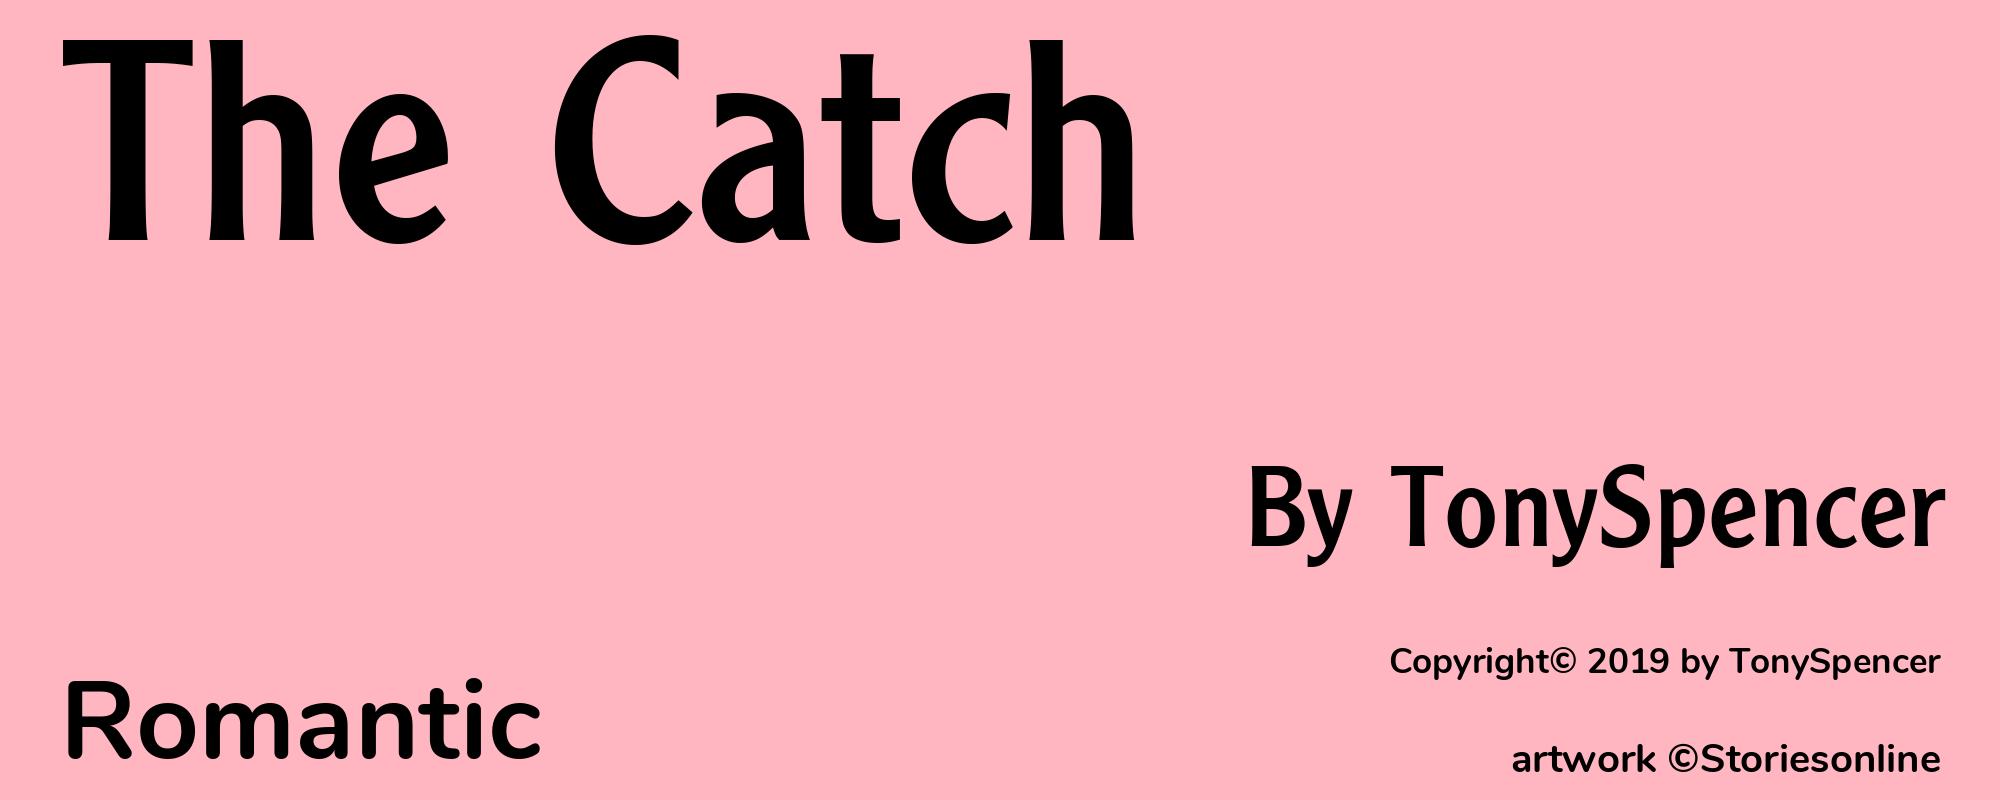 The Catch - Cover